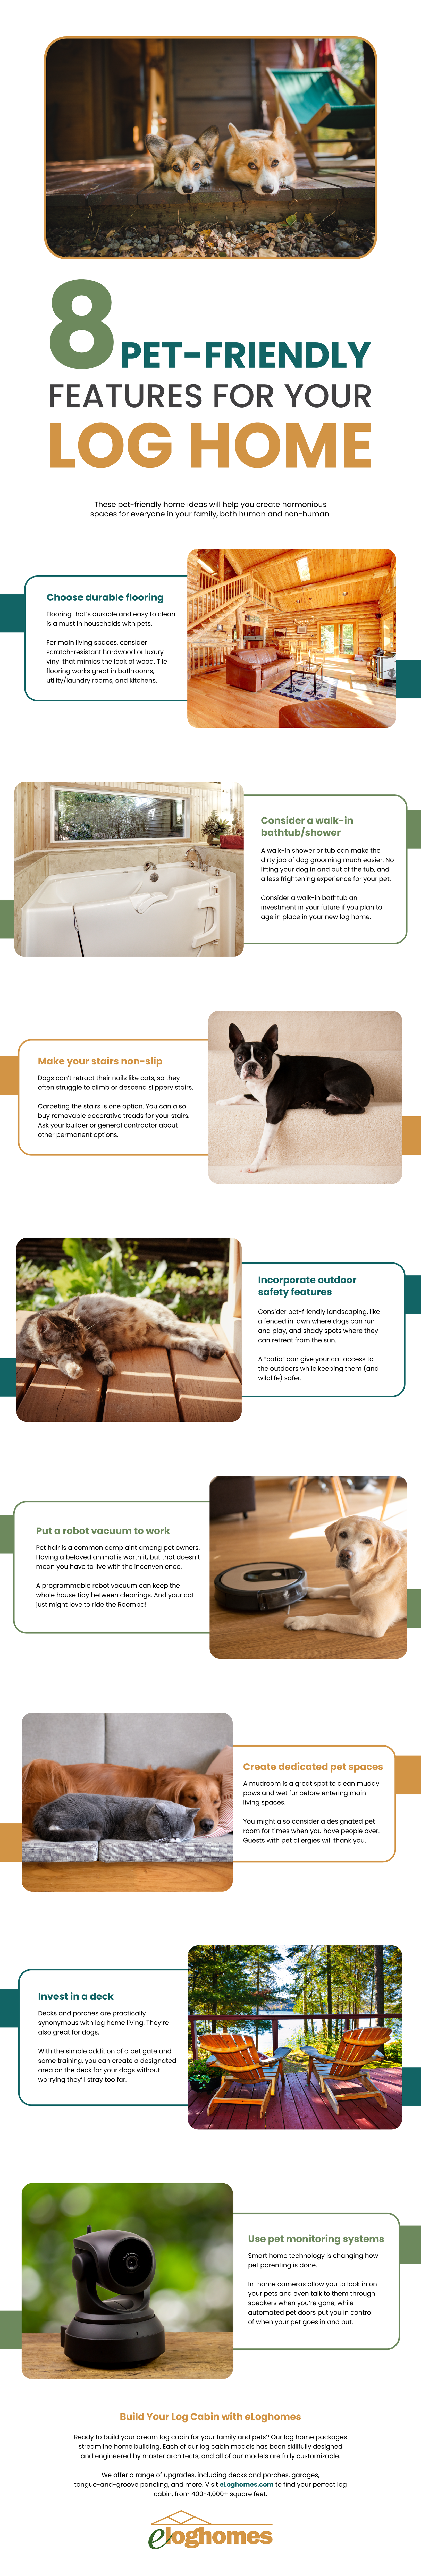 Pet-Friendly Features for Your Log Home Infographic